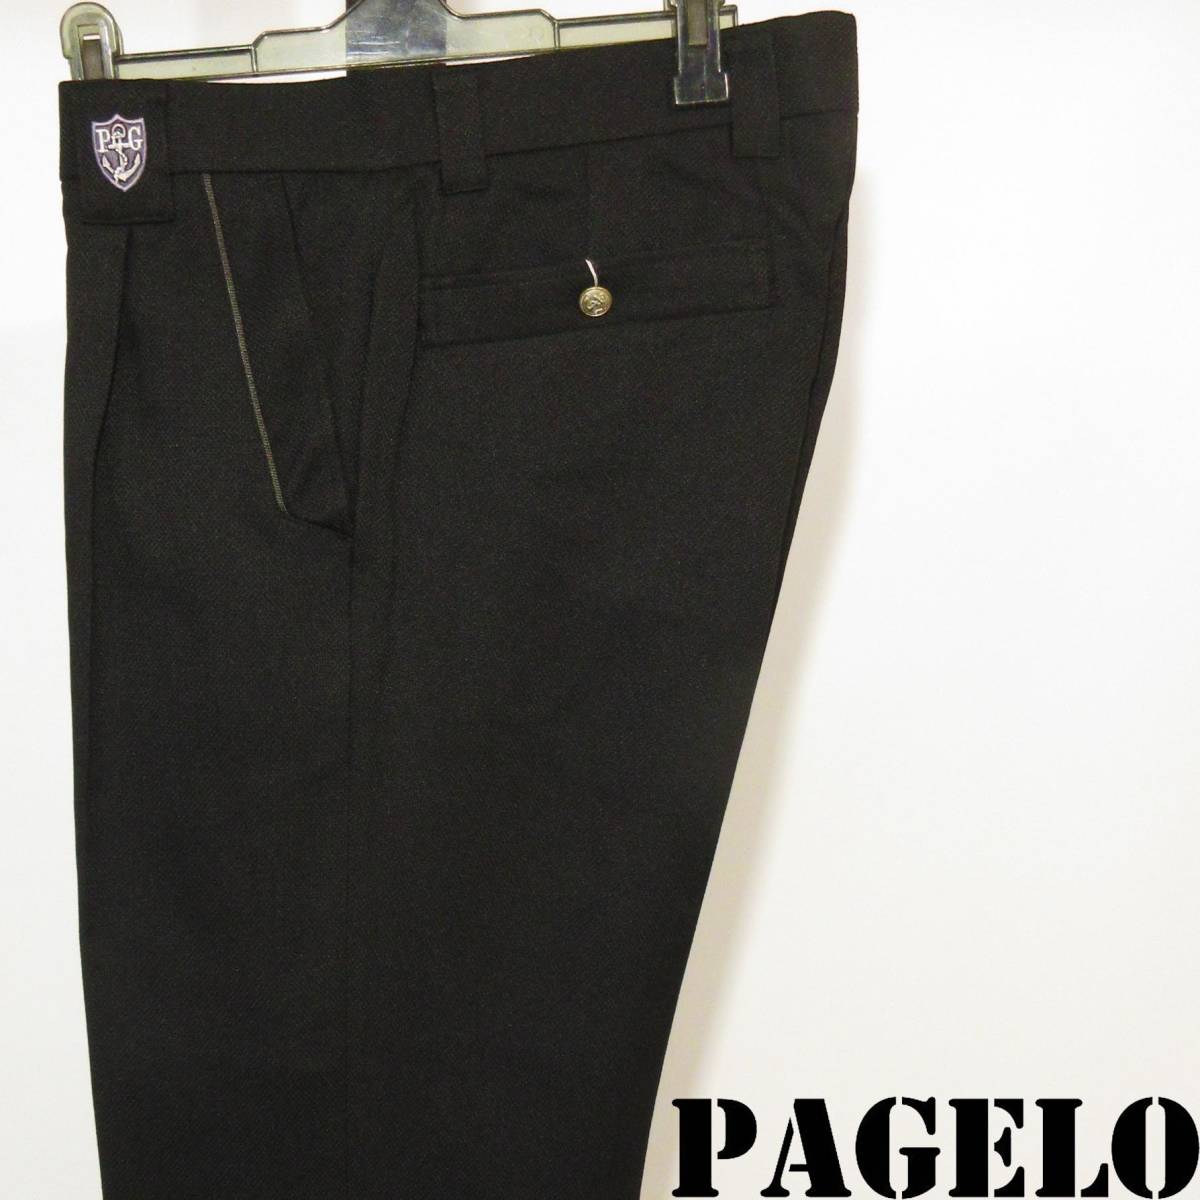 ★PAGELO★SALE タック付きスラックス【黒W91㎝】秋冬モデル 95510707 パジェロ